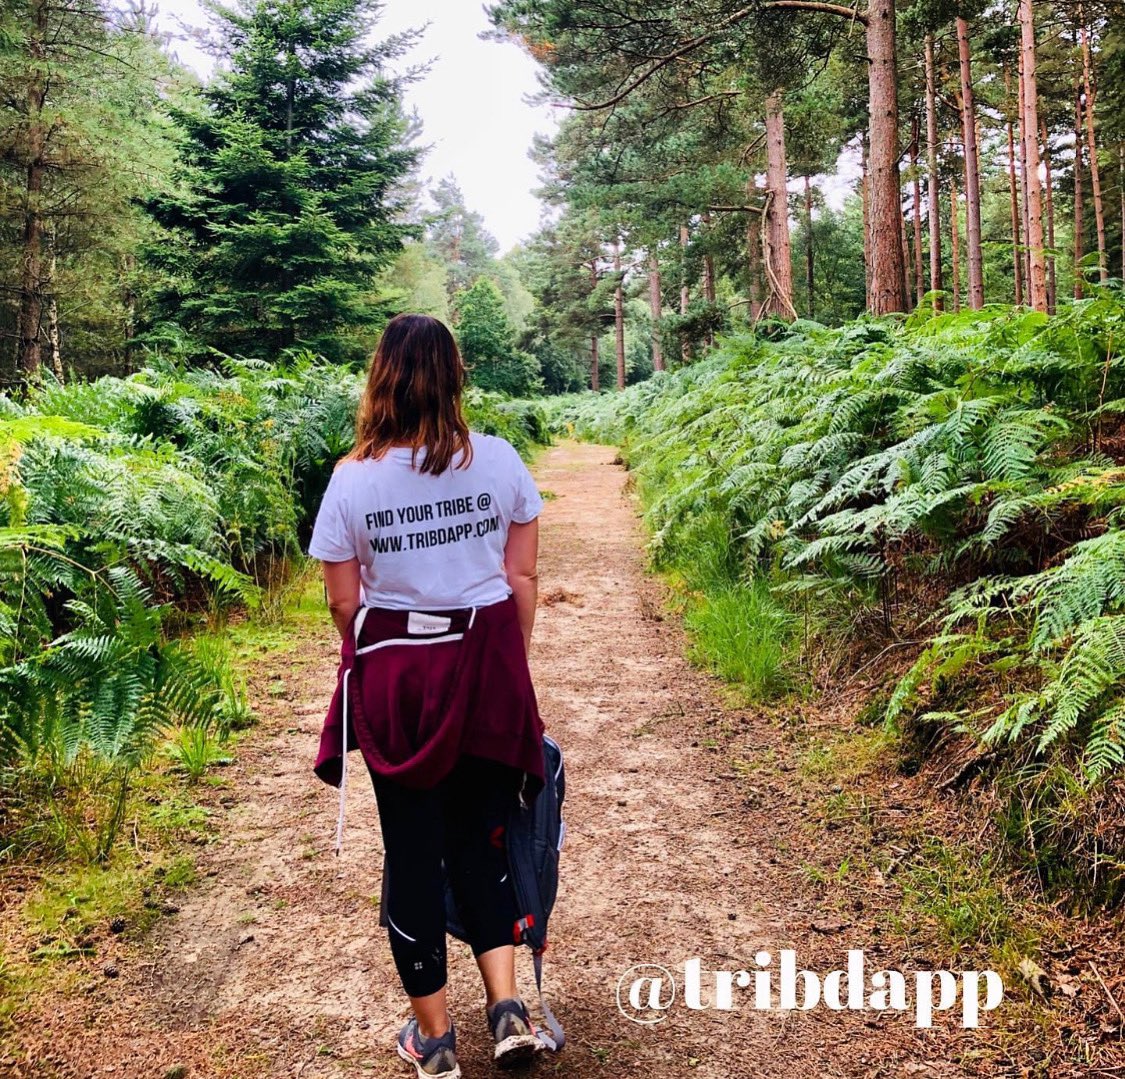 “Two roads diverged in a wood, and I took the one less traveled by,
And that has made all the difference.” ~ The Road Not Taken, Robert Frost

#tribd #tribdapp #findyourtribe #roadlesstraveled #roadlesstravelled #roadnottaken #solotravel